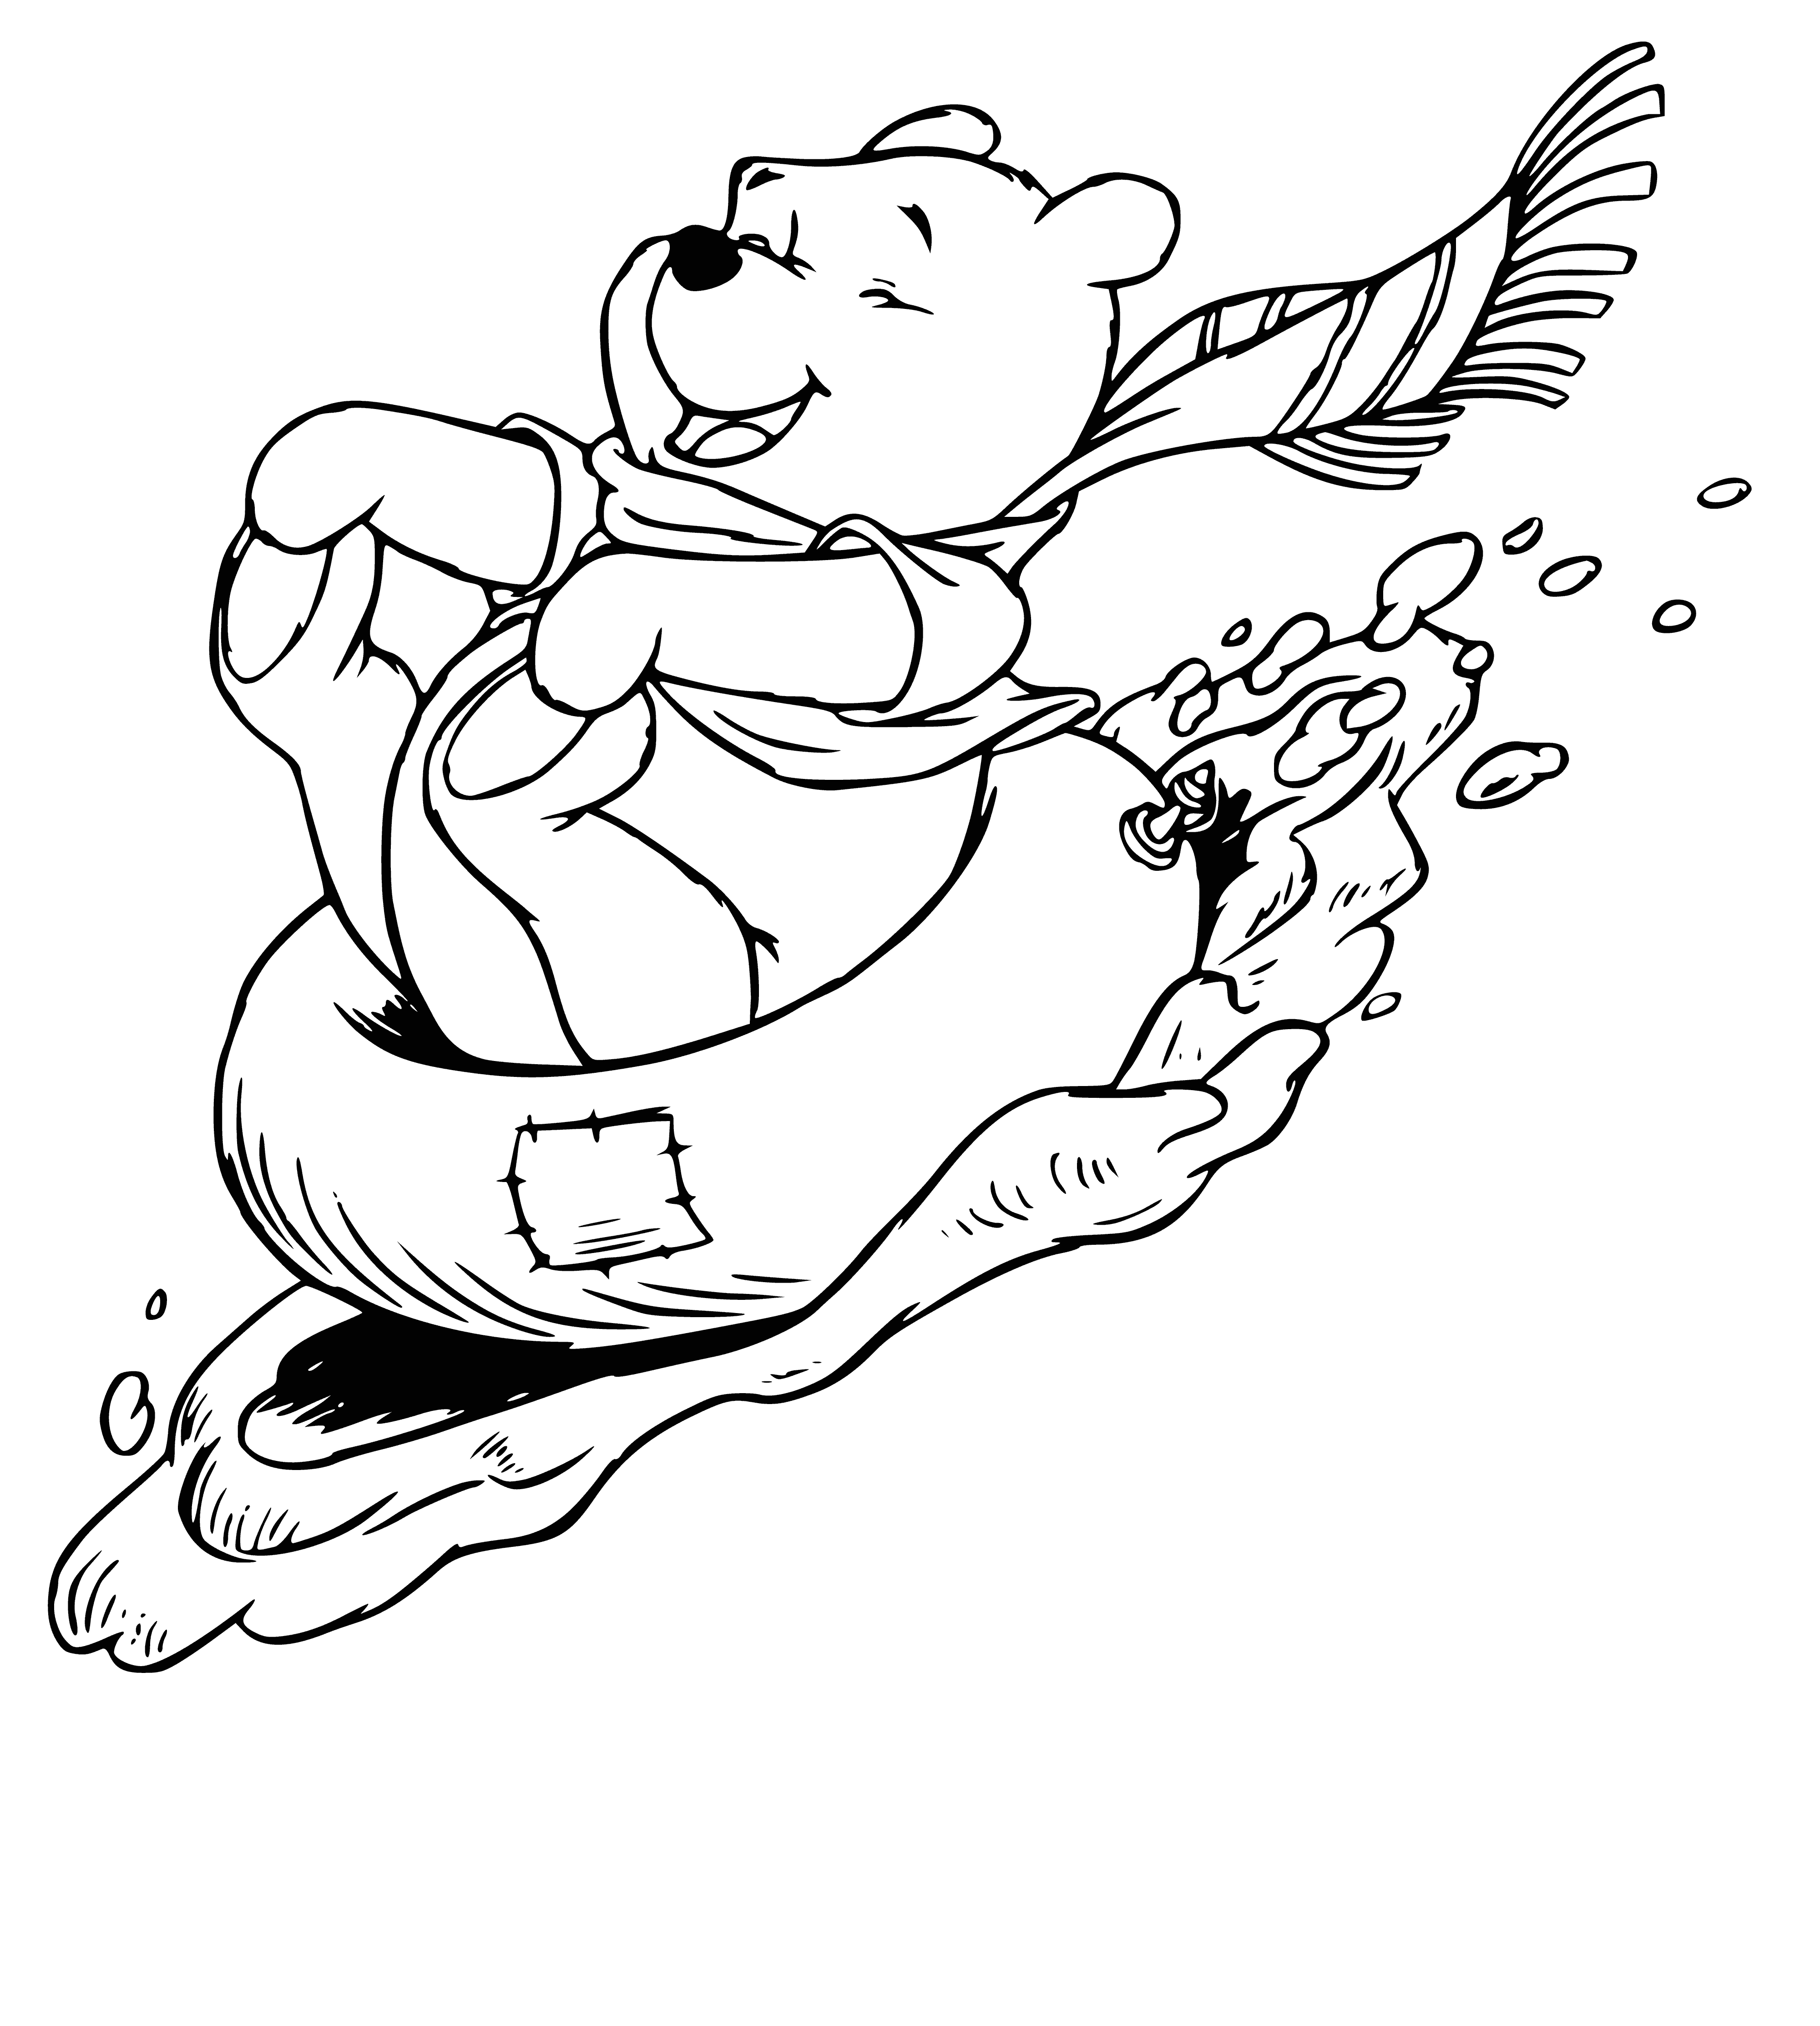 coloring page: Winnie the Pooh rolls down a mountain with a pot of honey - a bear with a brown coat.